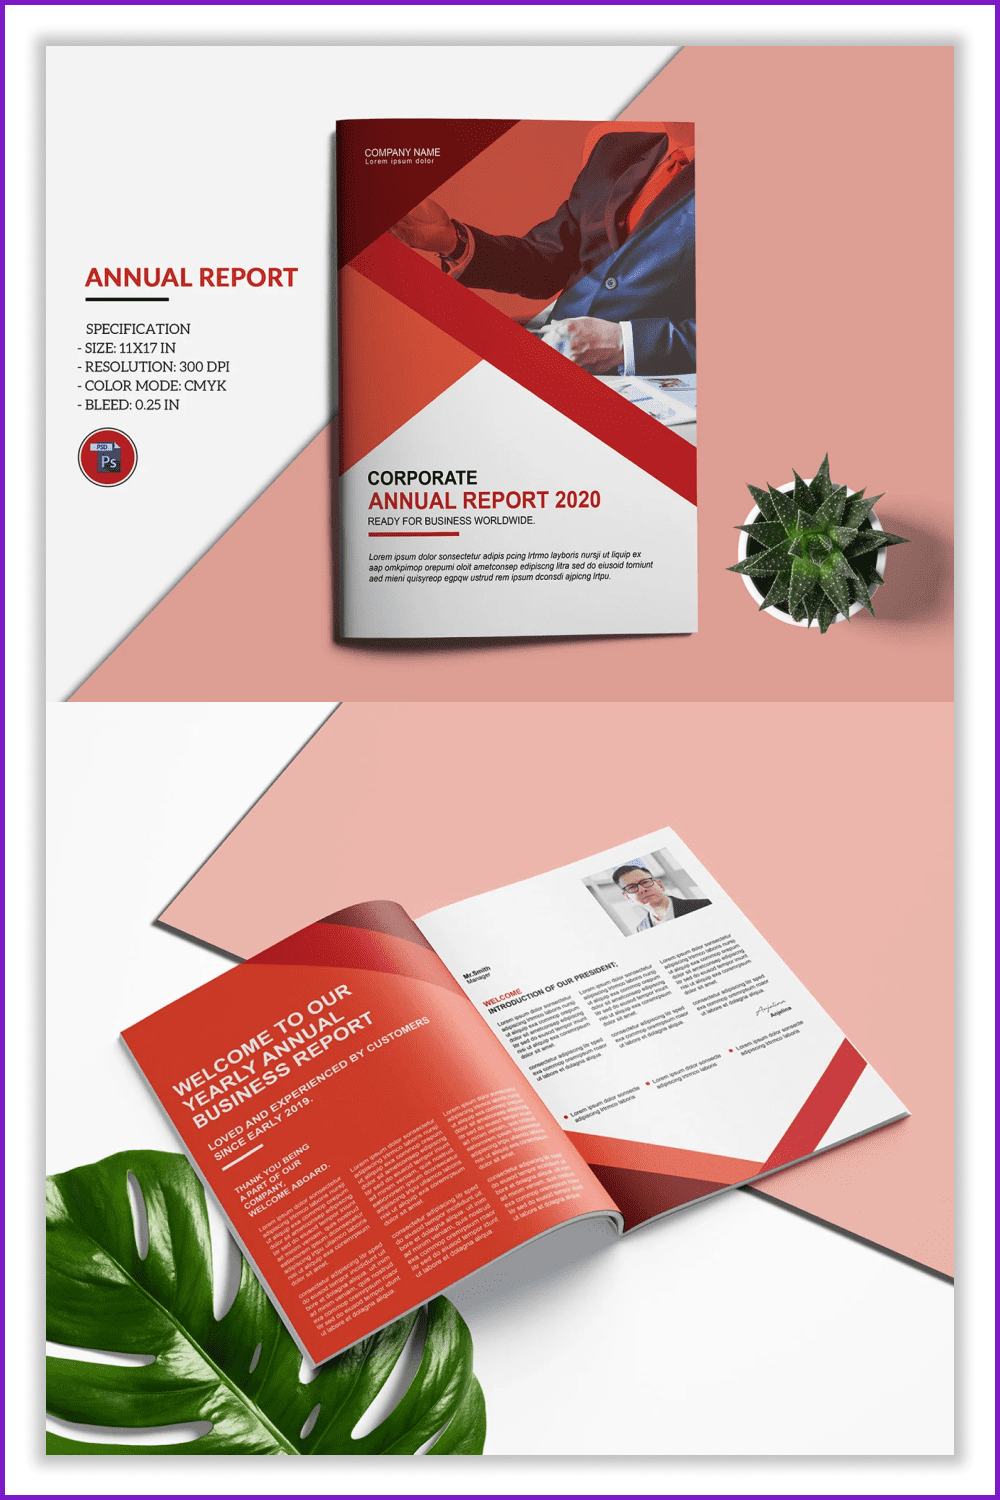 Photos of annual report made like a book in red colors.